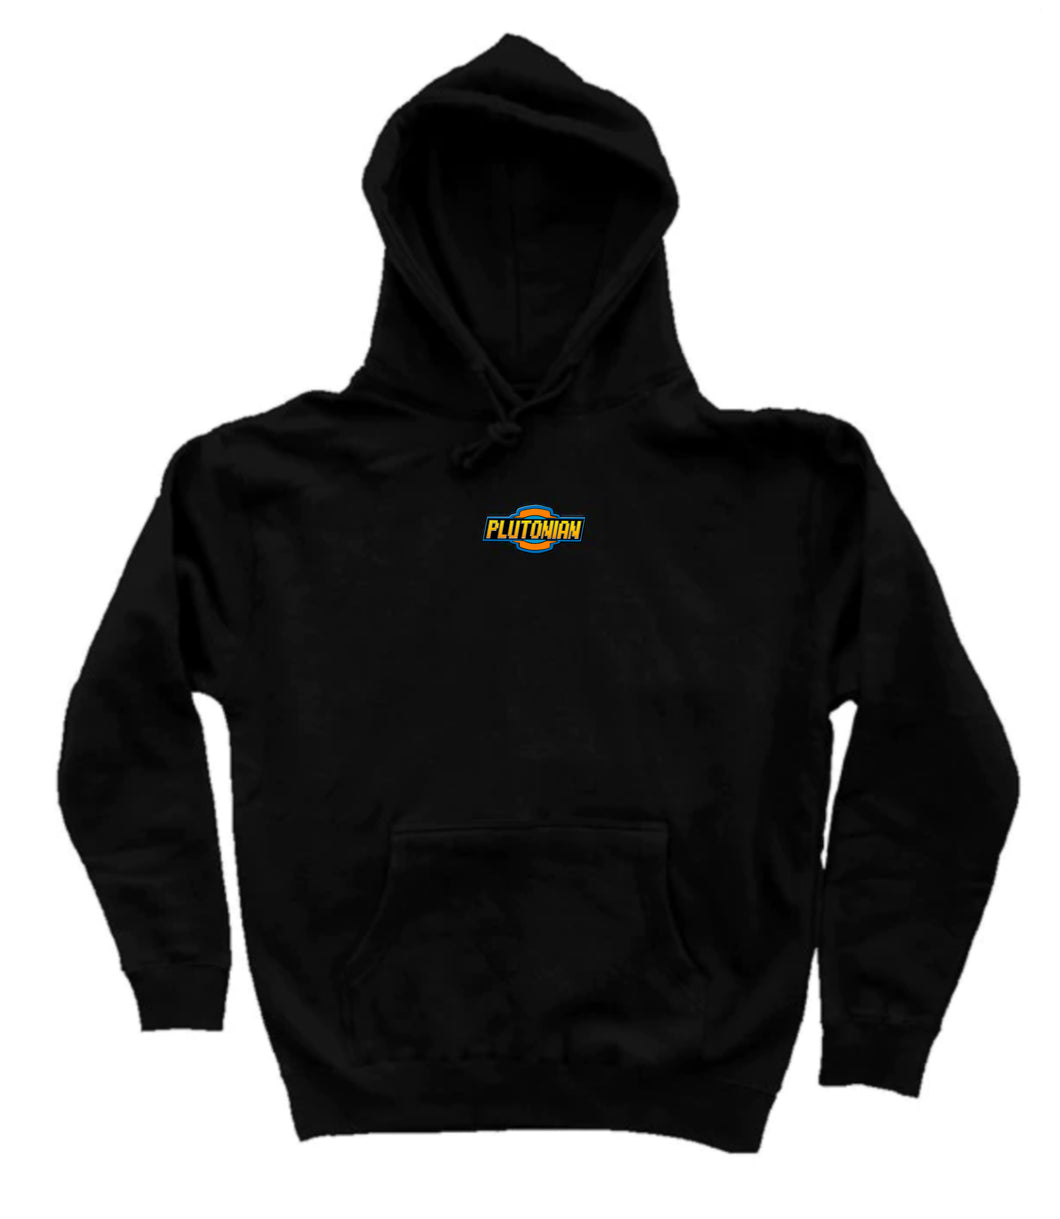 Devour Angemon ® (Embroidered) Pullover Hoodie! NEW!